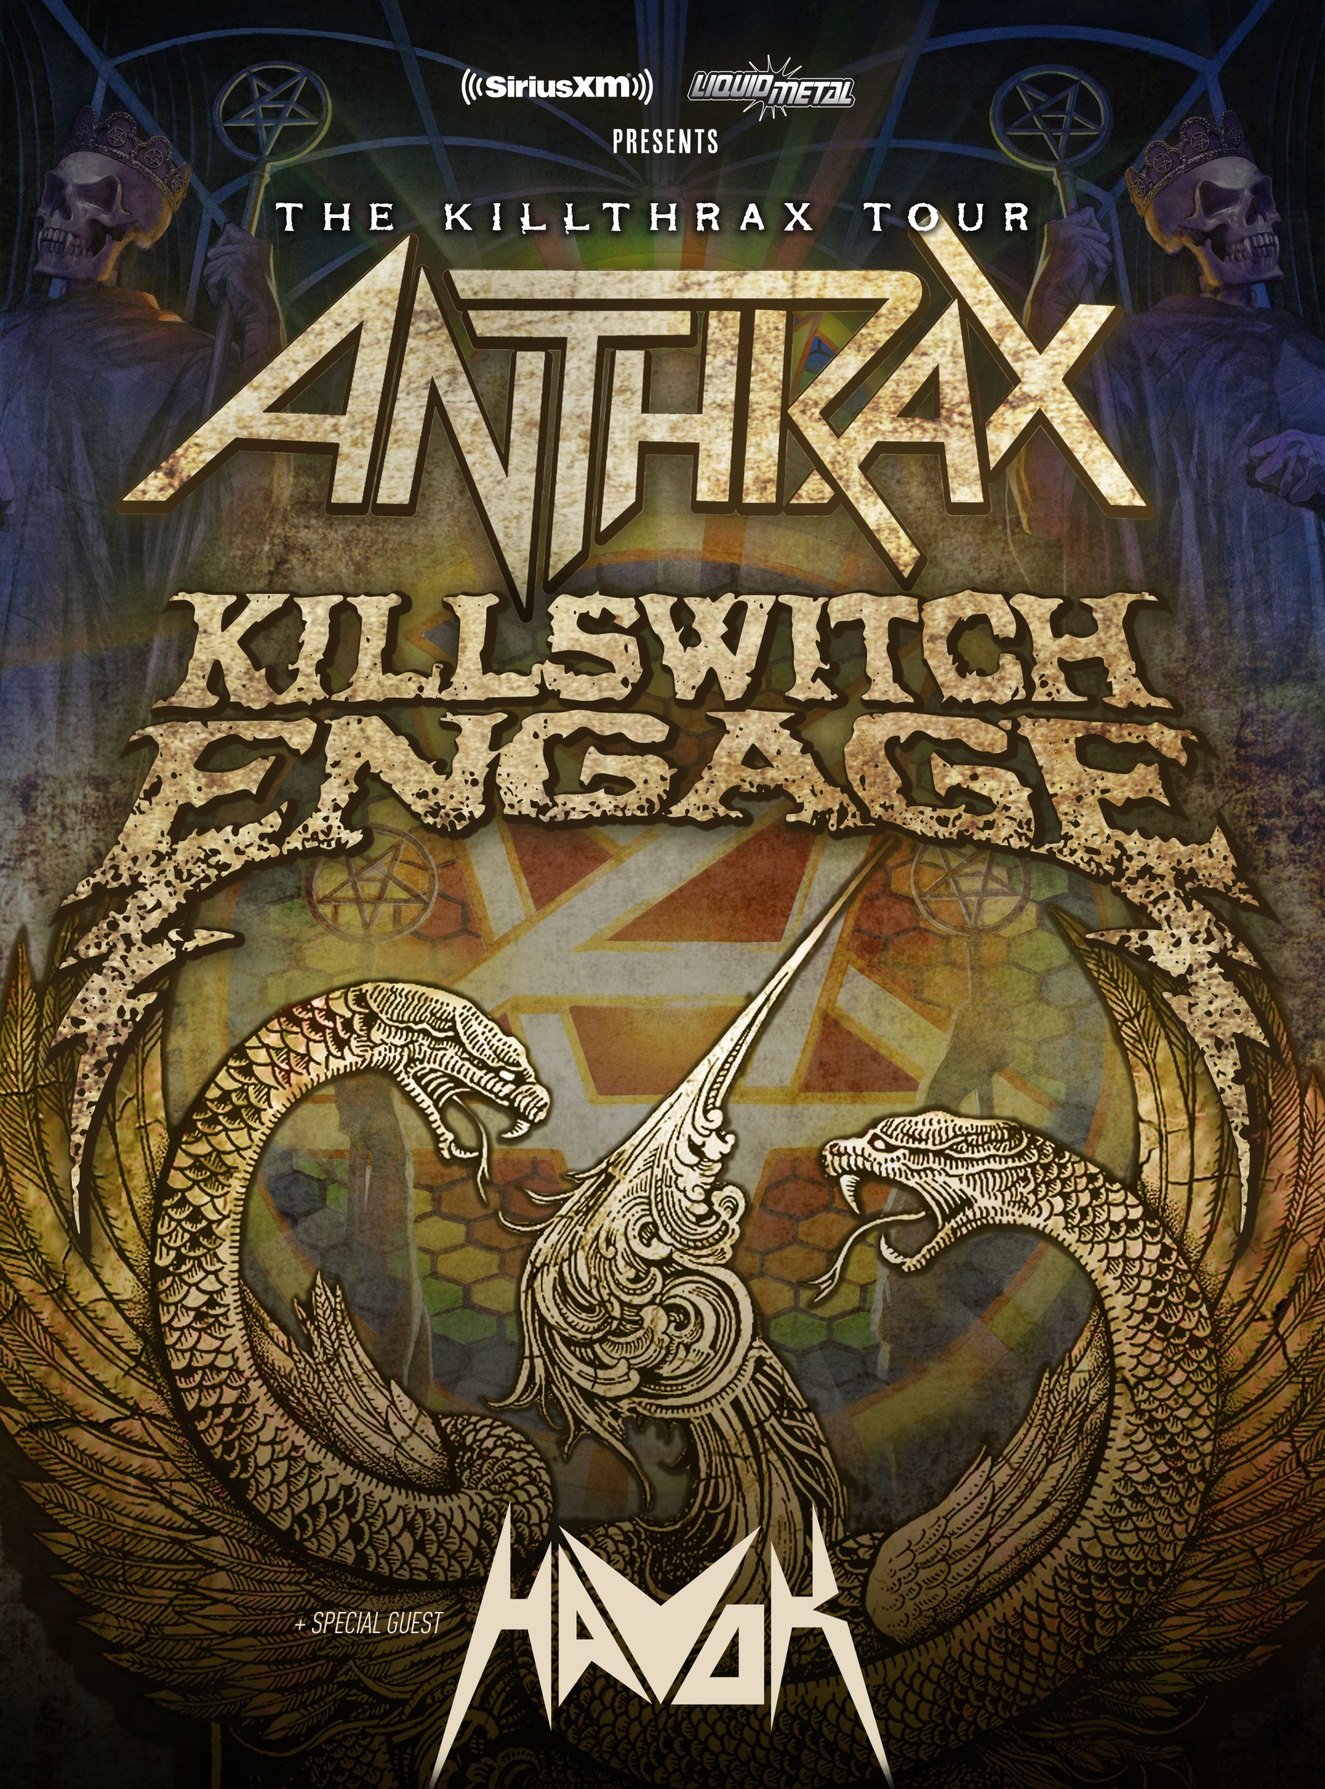 killswitch engage tour schedule